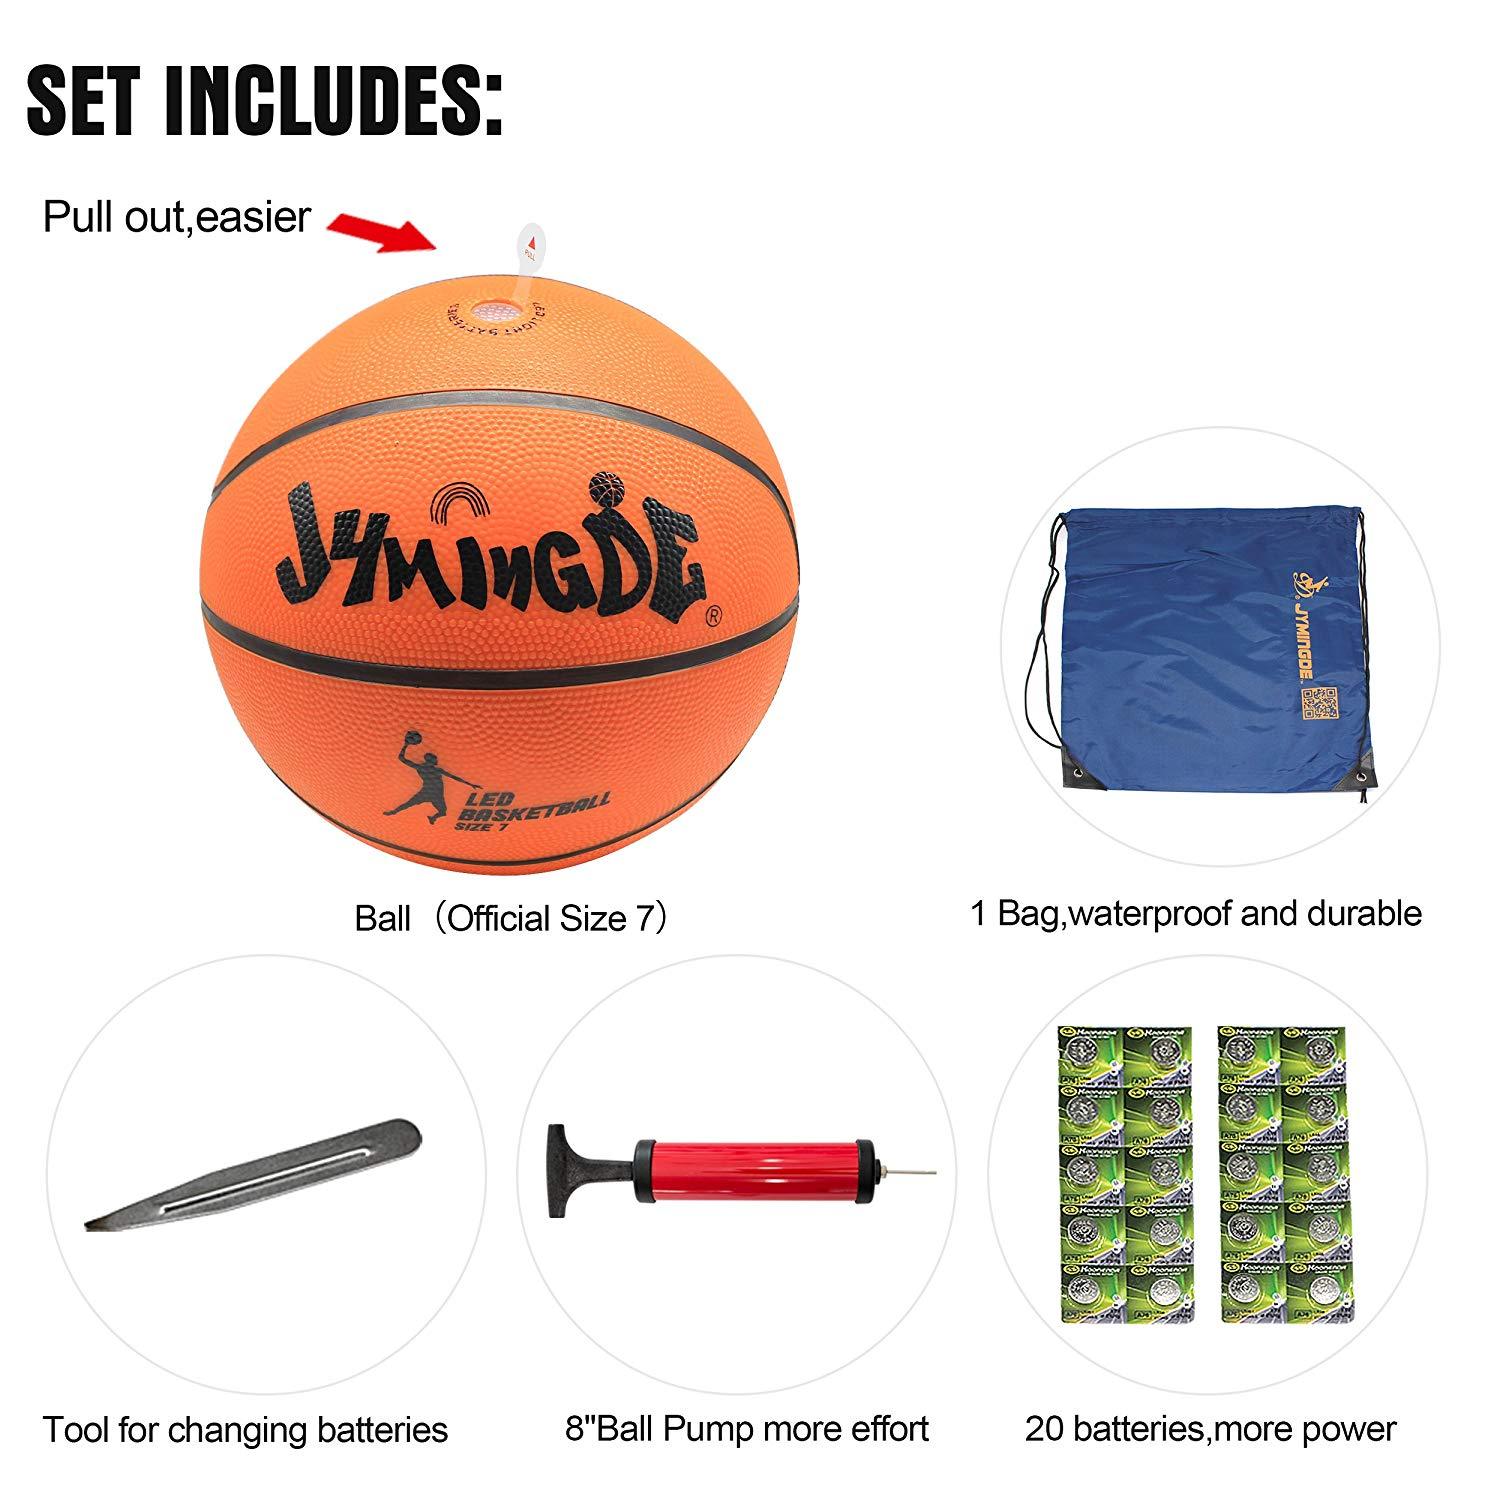 Complete set of LED basketball from Woosir